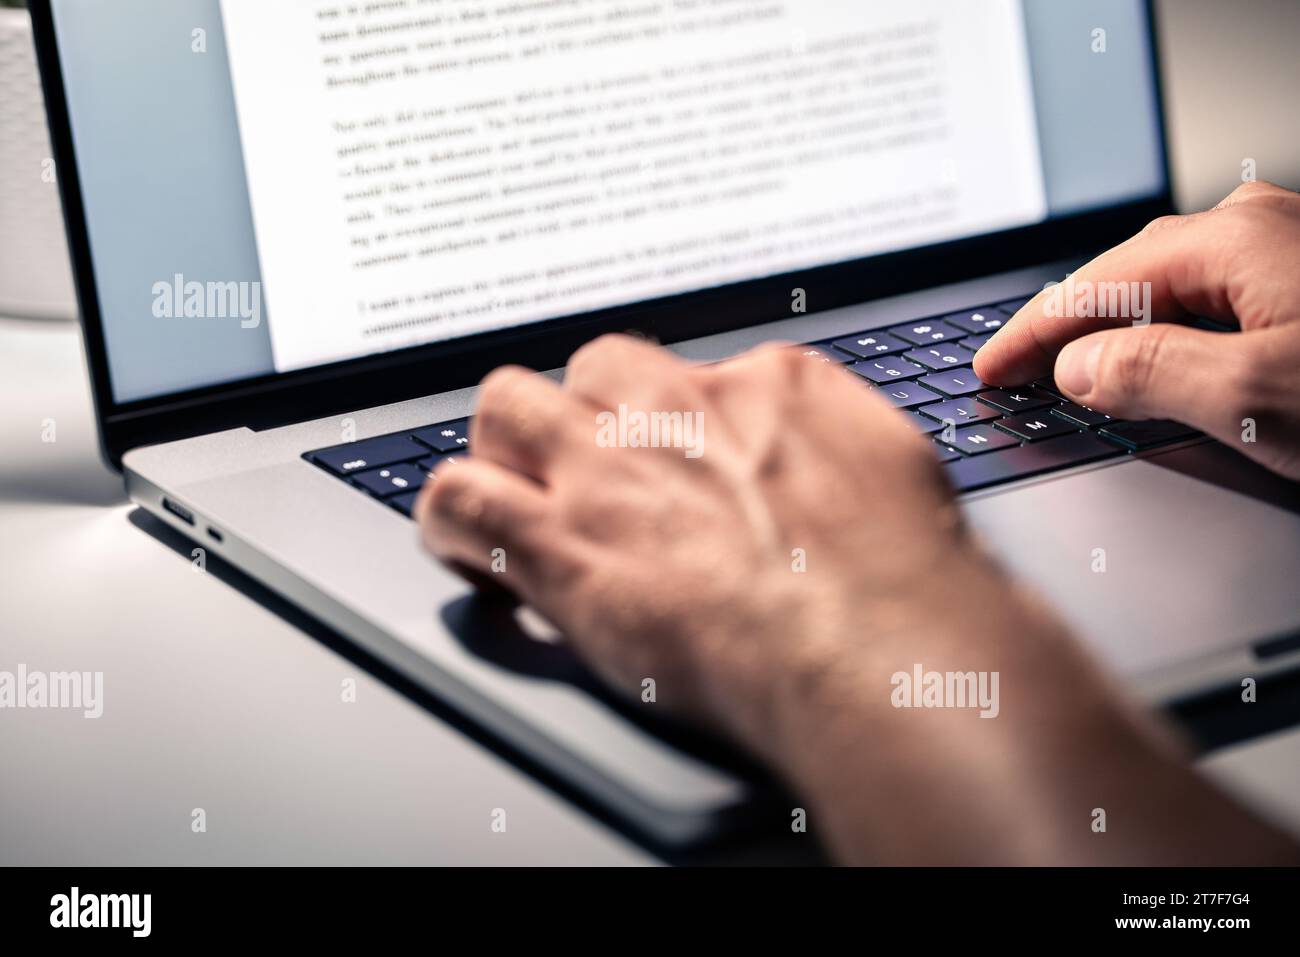 Writing text document, online content, book, letter or essay. Writer, journalist or freelance columnist with laptop. Resume, news article, report. Stock Photo